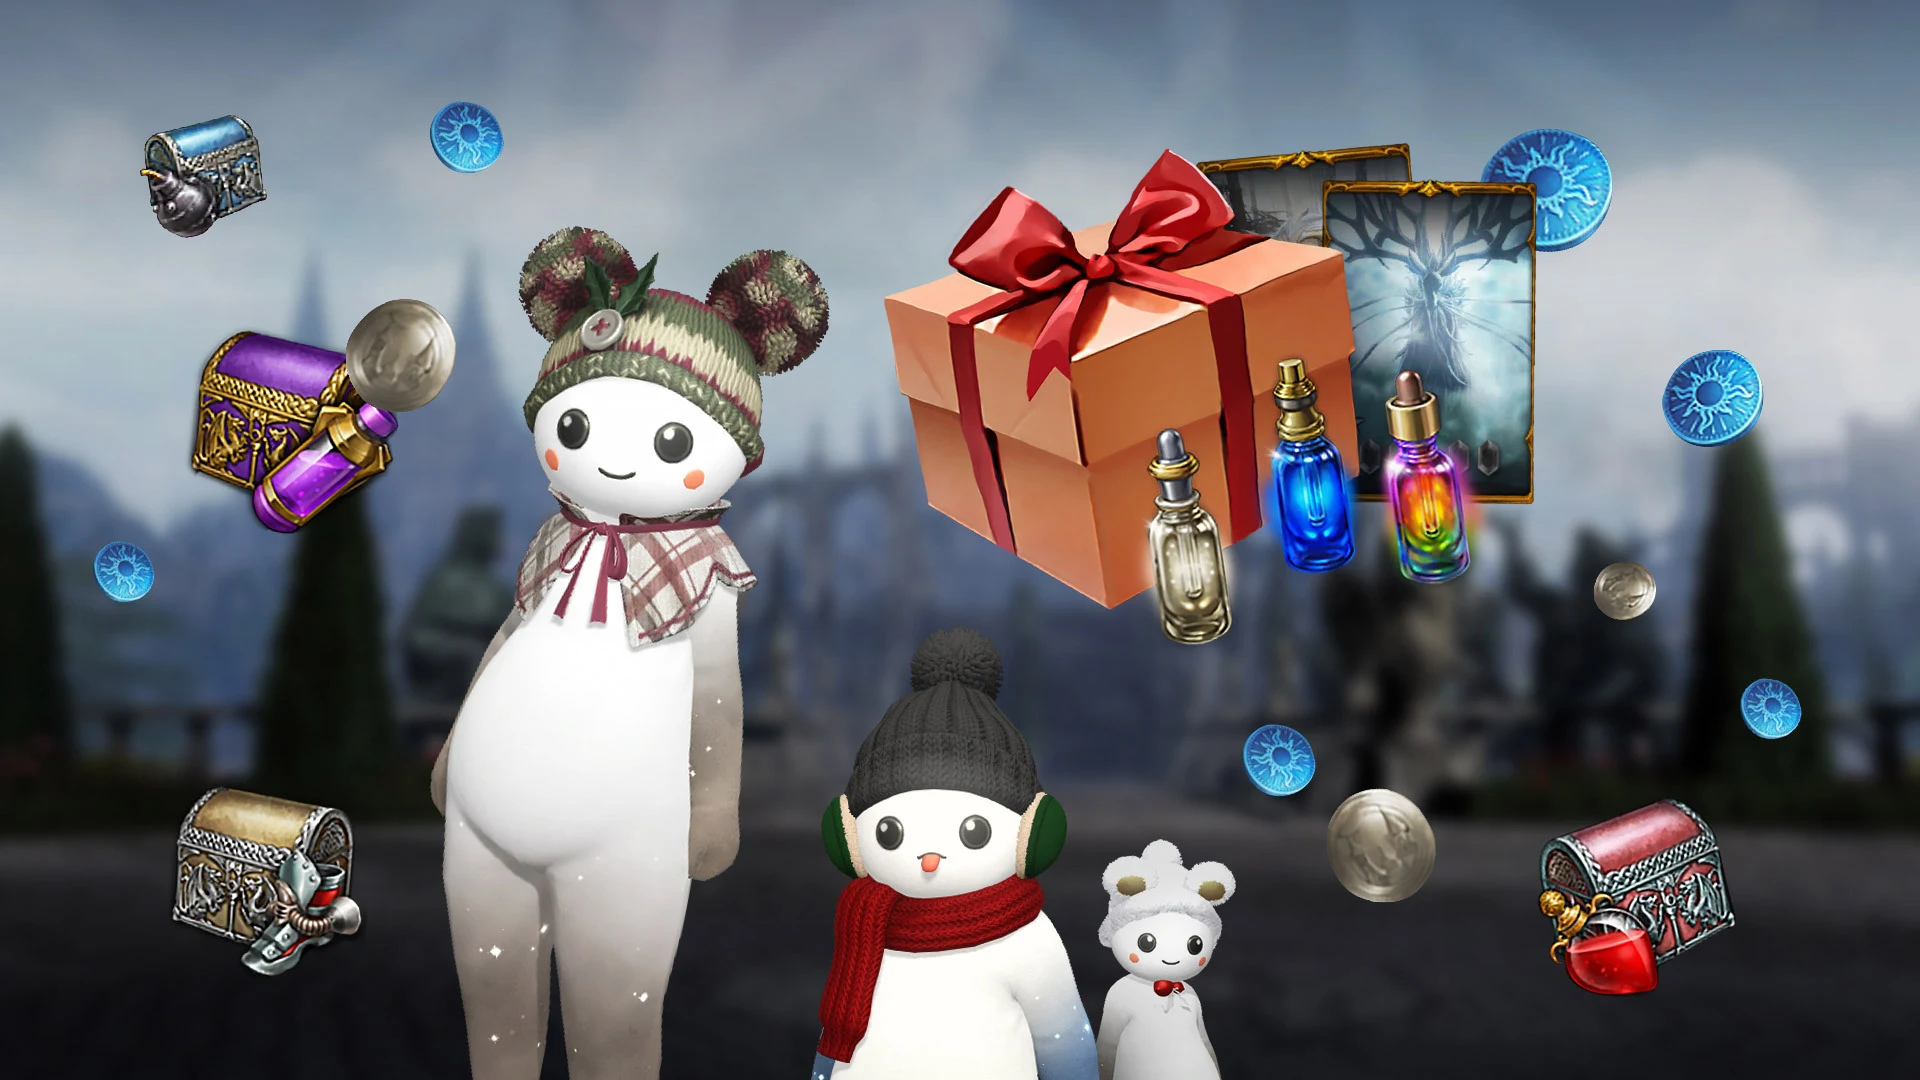 Lost Ark Developers Give Out Extra Freebies to Make Up for Unpopular Holiday Gift Item 3